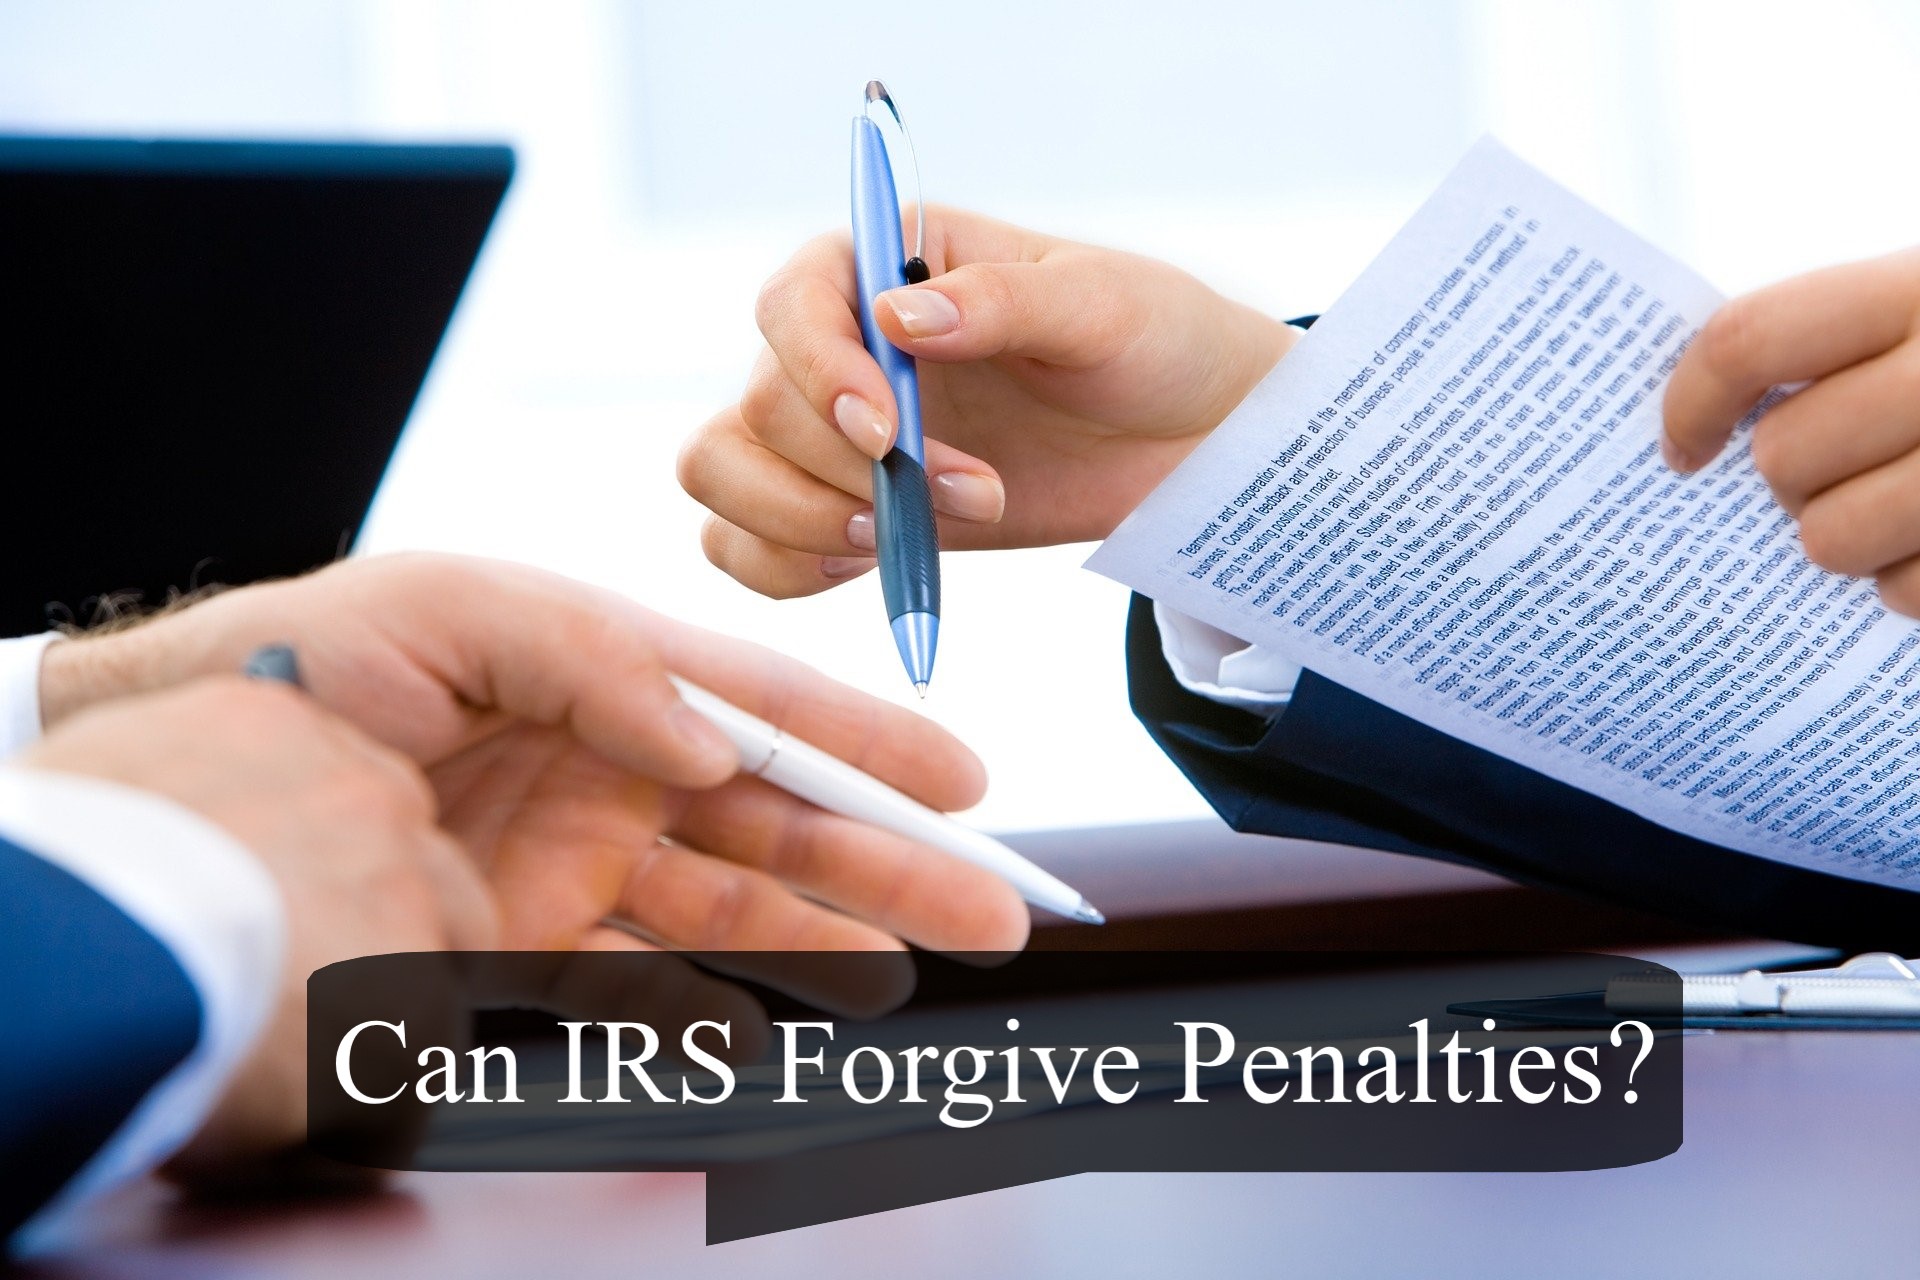 Can IRS Forgive Penalties?